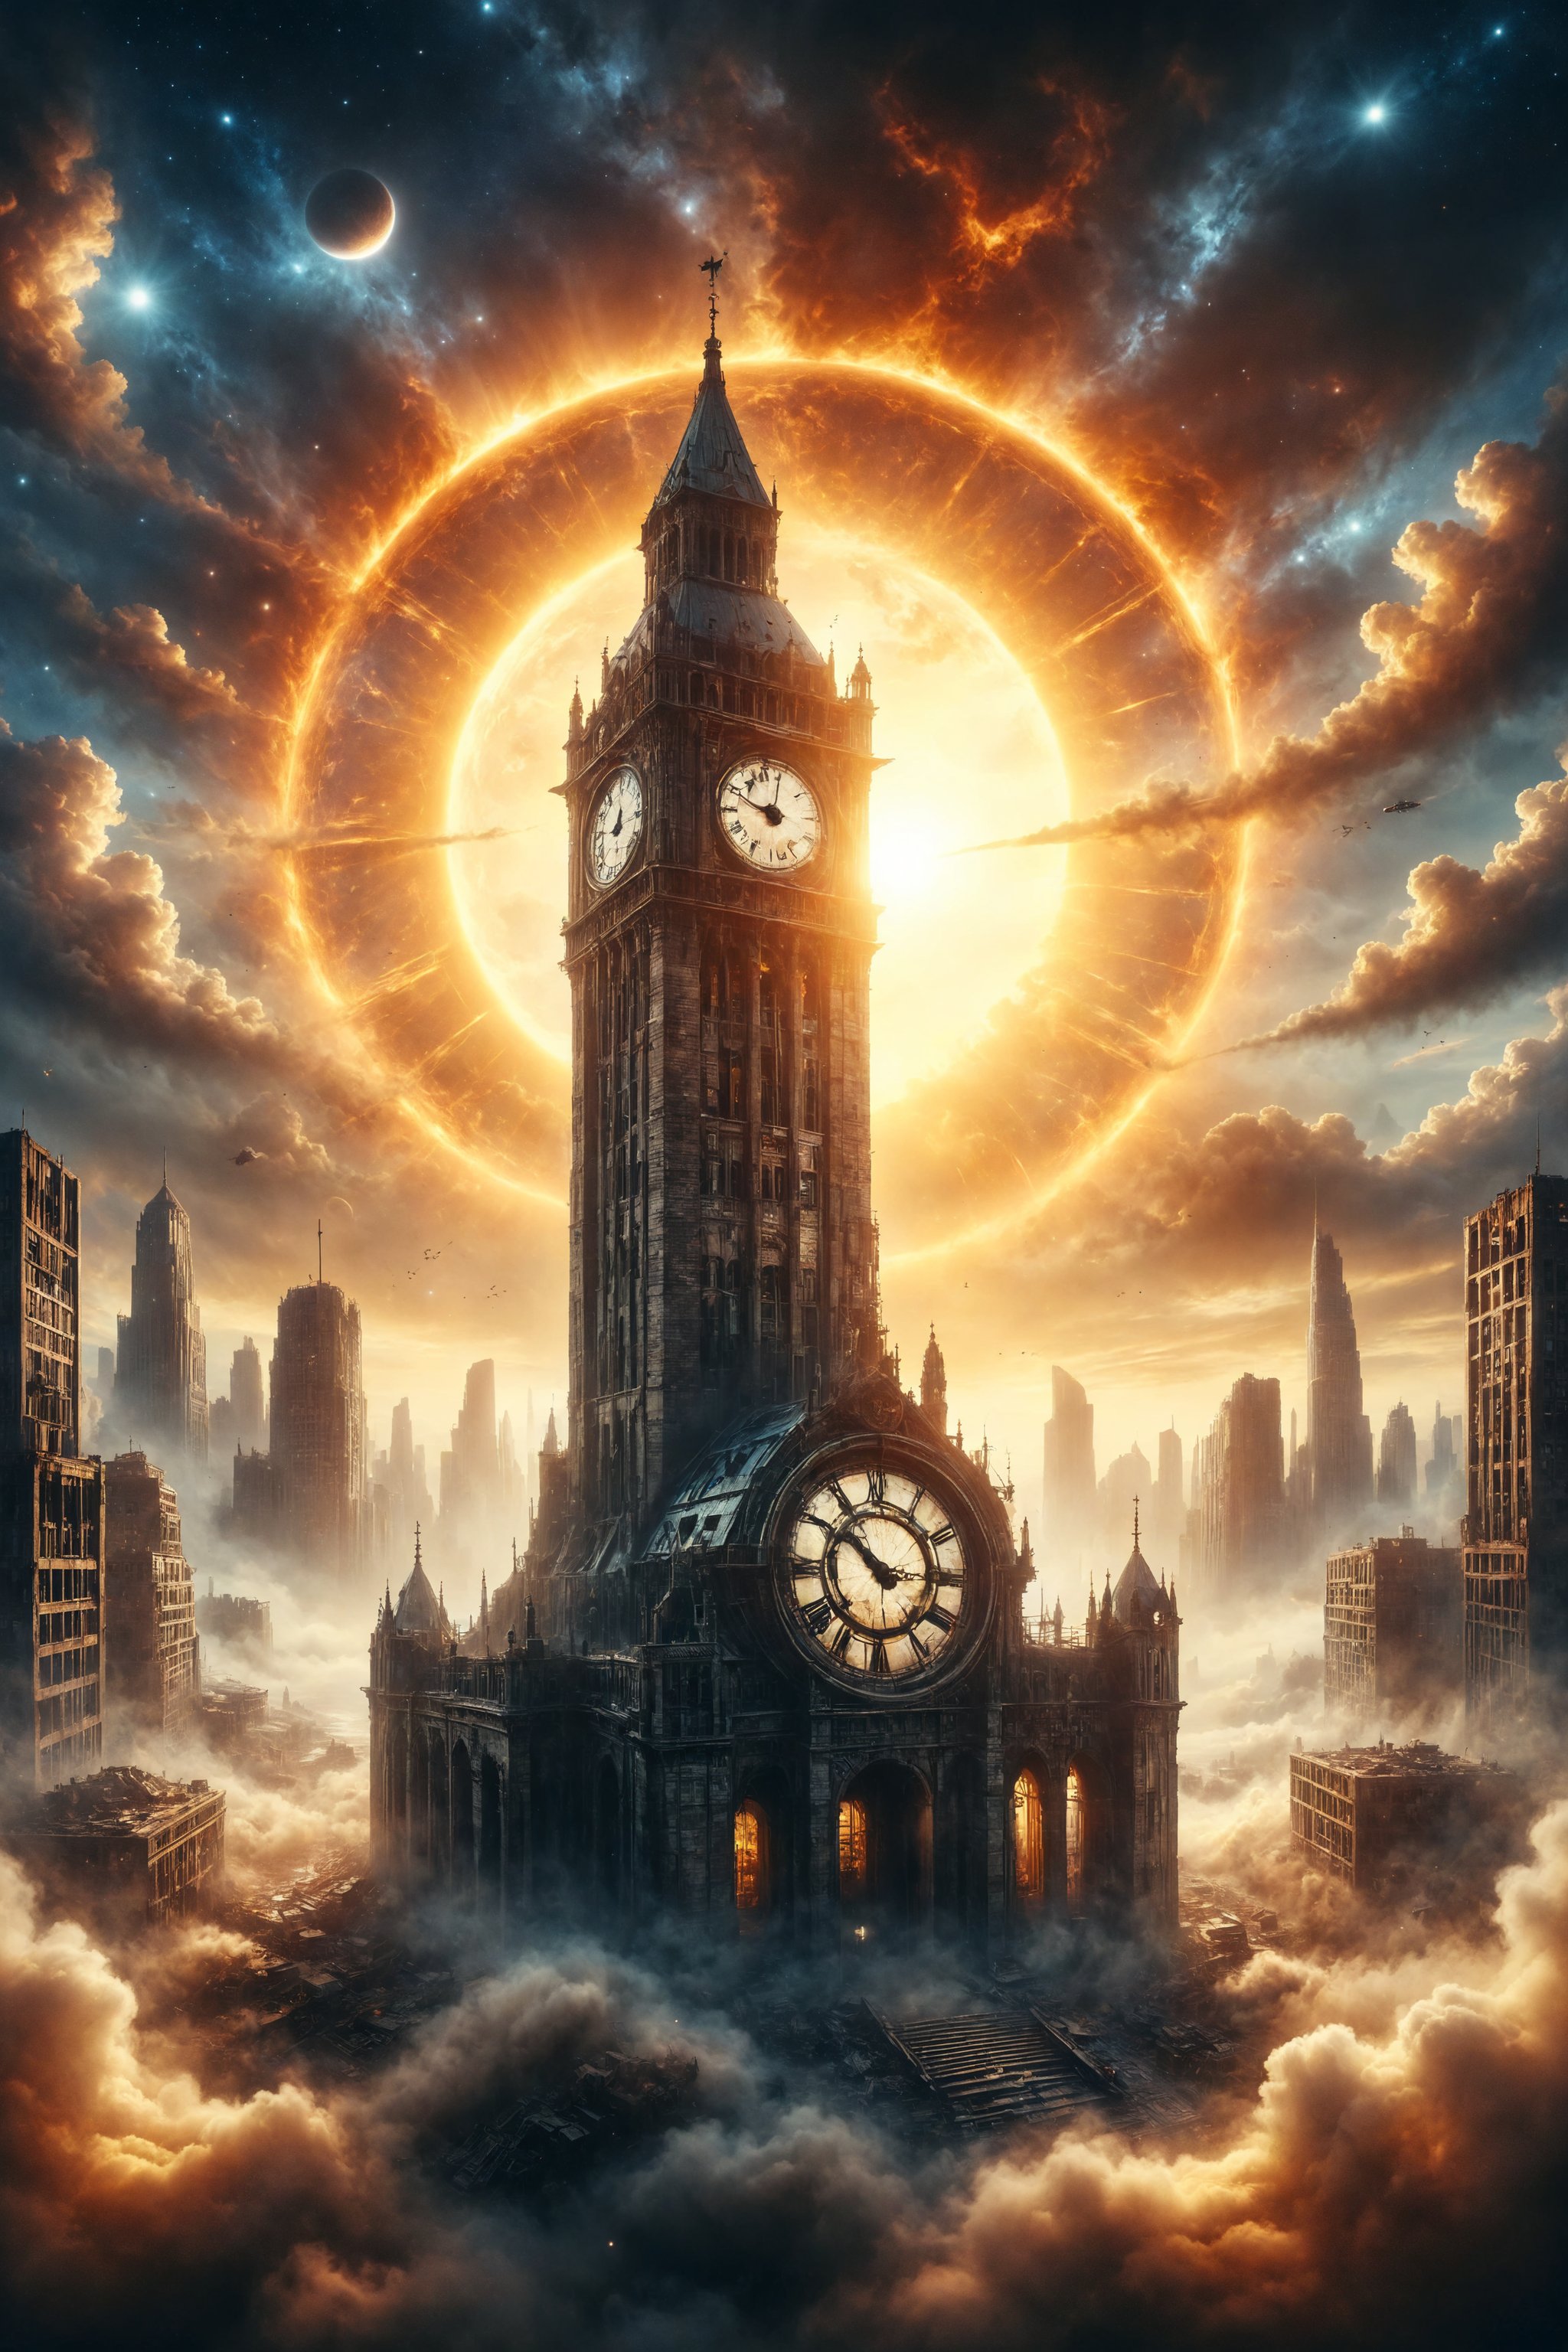 Design a scene of a giant clock tower orbiting near the sun, marking cosmic time with precision.